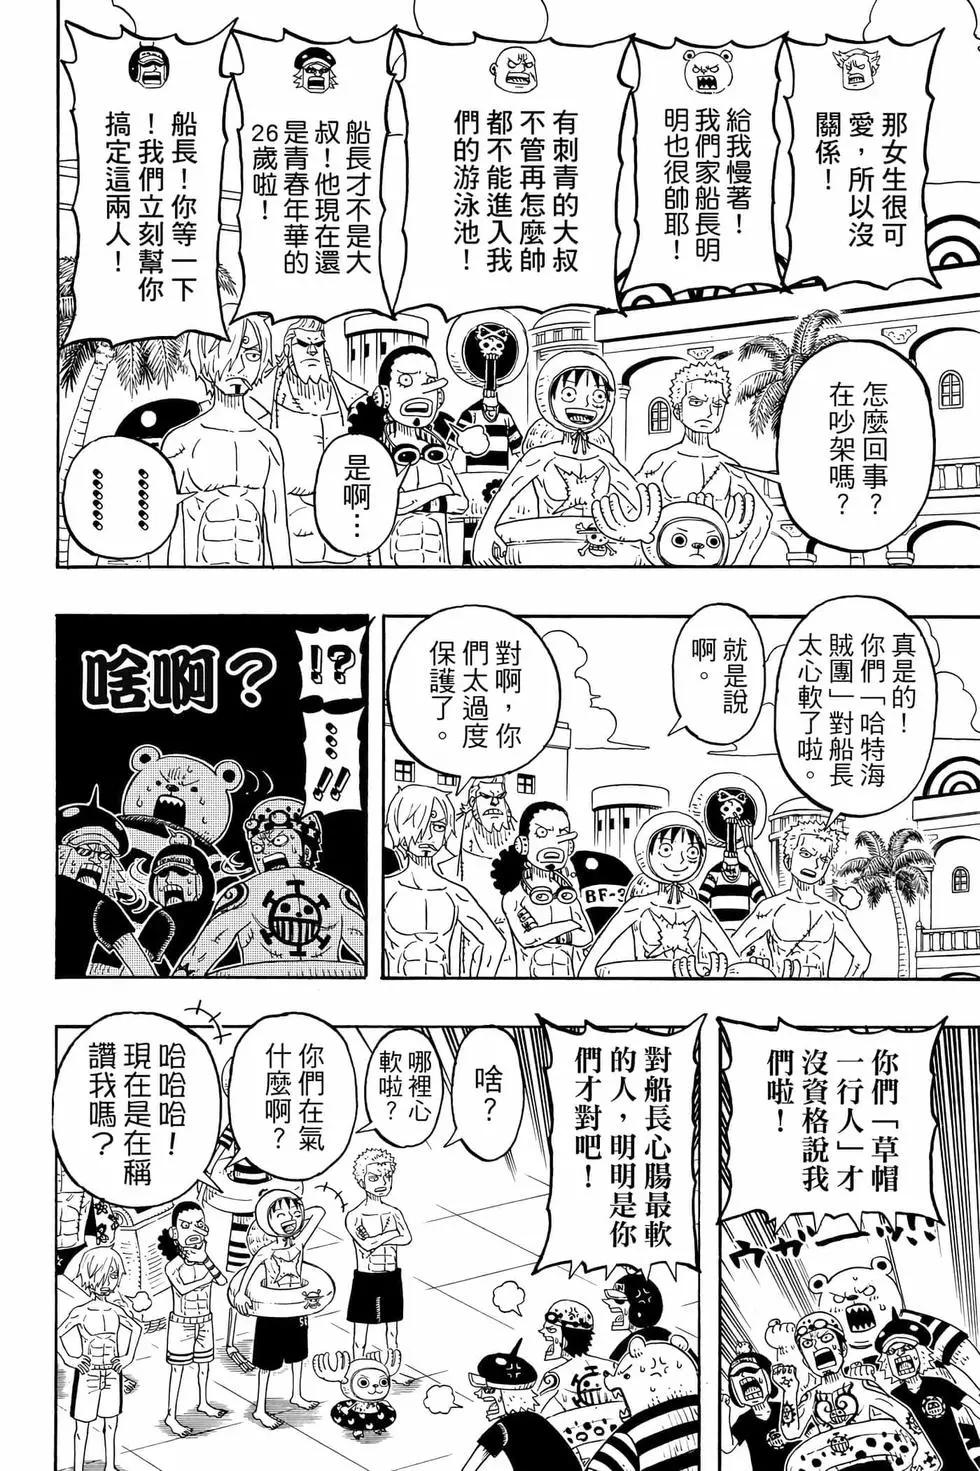 One piece party - 第04卷(2/4) - 1